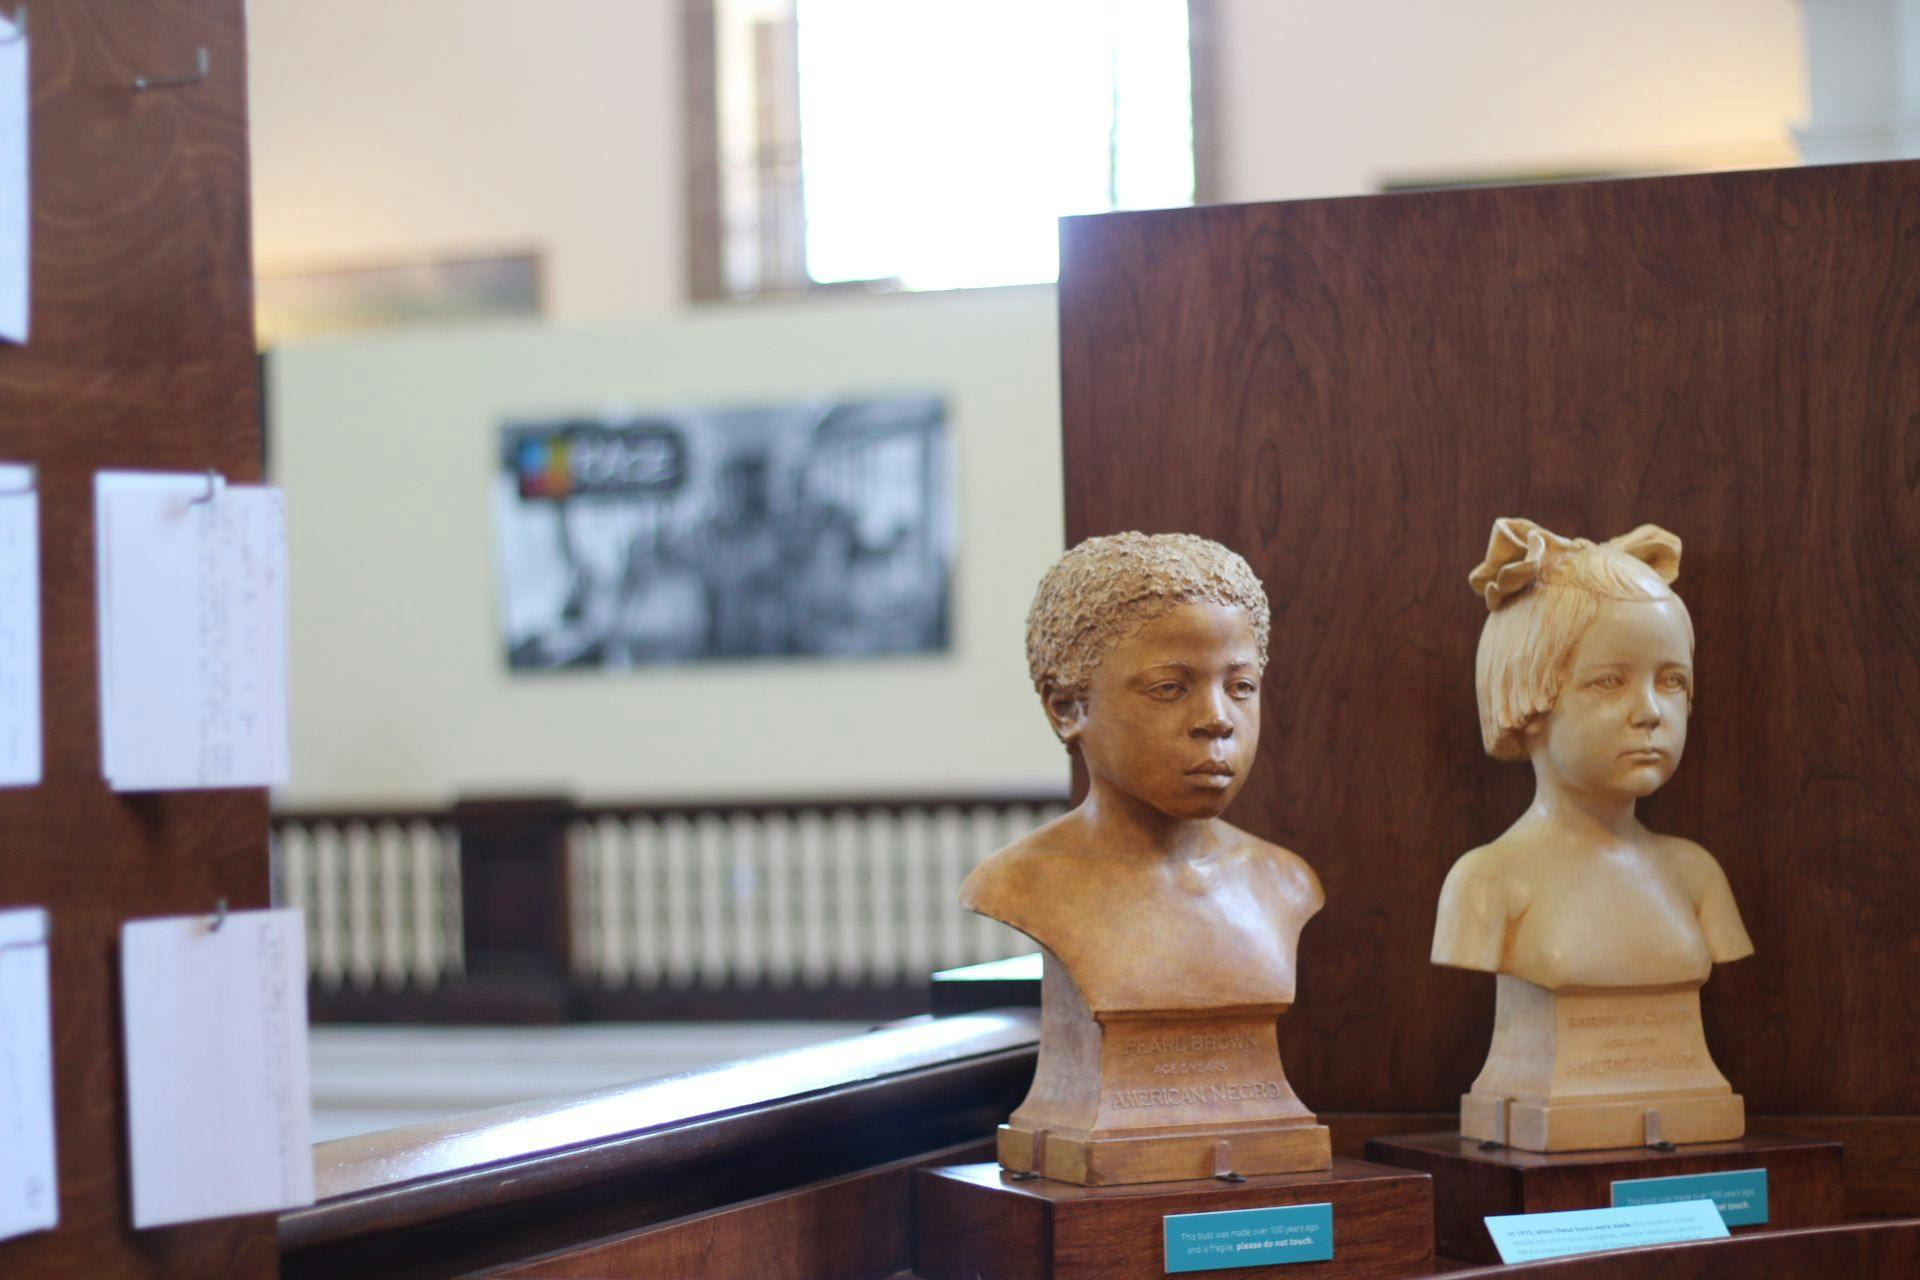 Busts of two children, one Black and one white, sit next to each other in the "Race: Are We So Different?" exhibit.